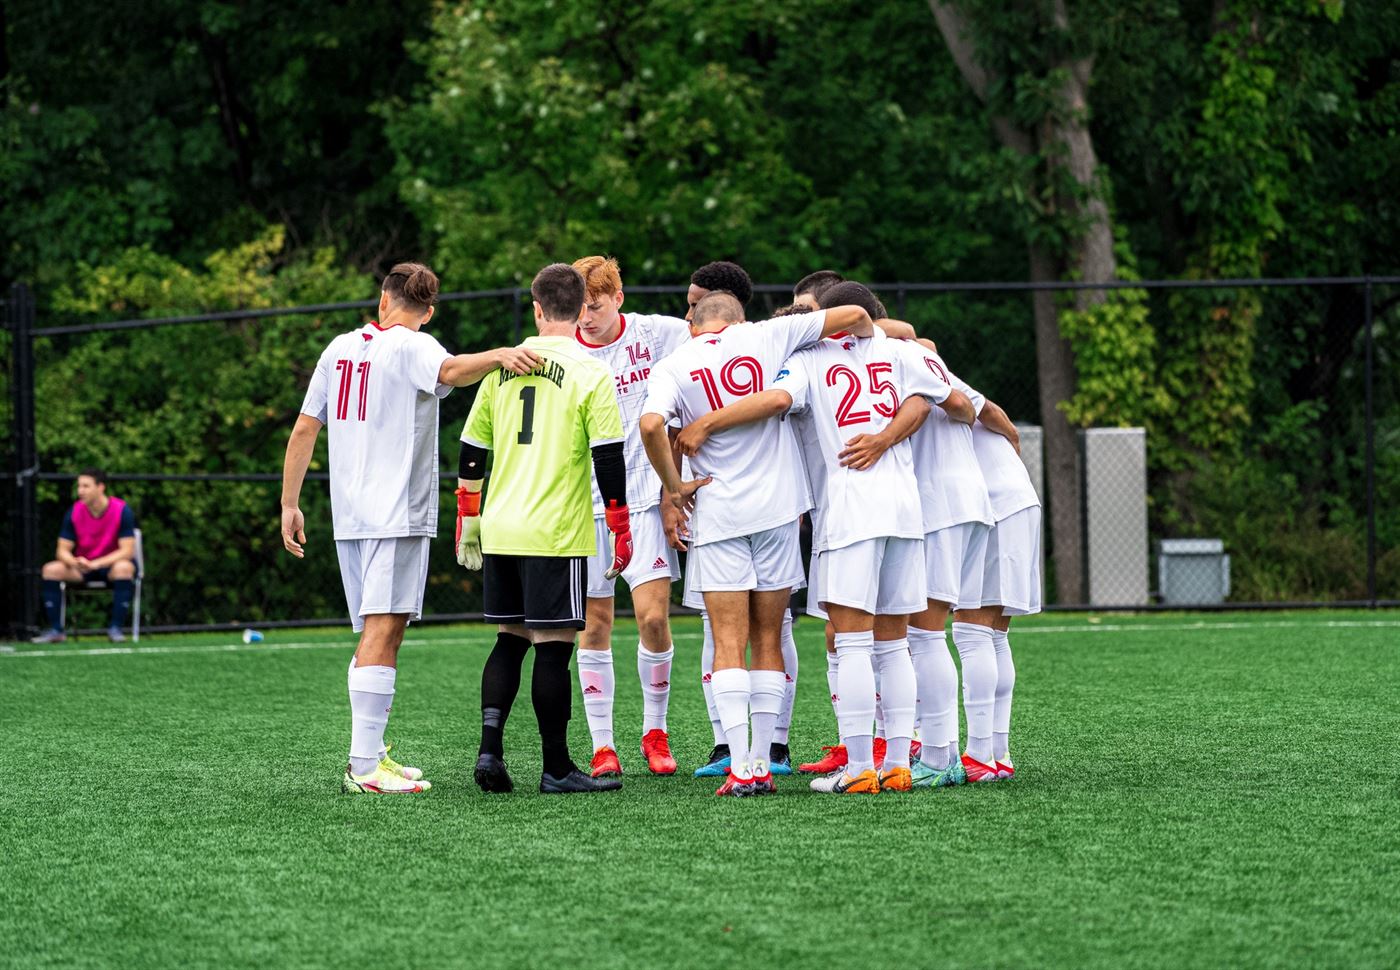 Players of the Montclair State men's soccer team huddle up prior to the start of the game. Photo courtesy of David Venezia